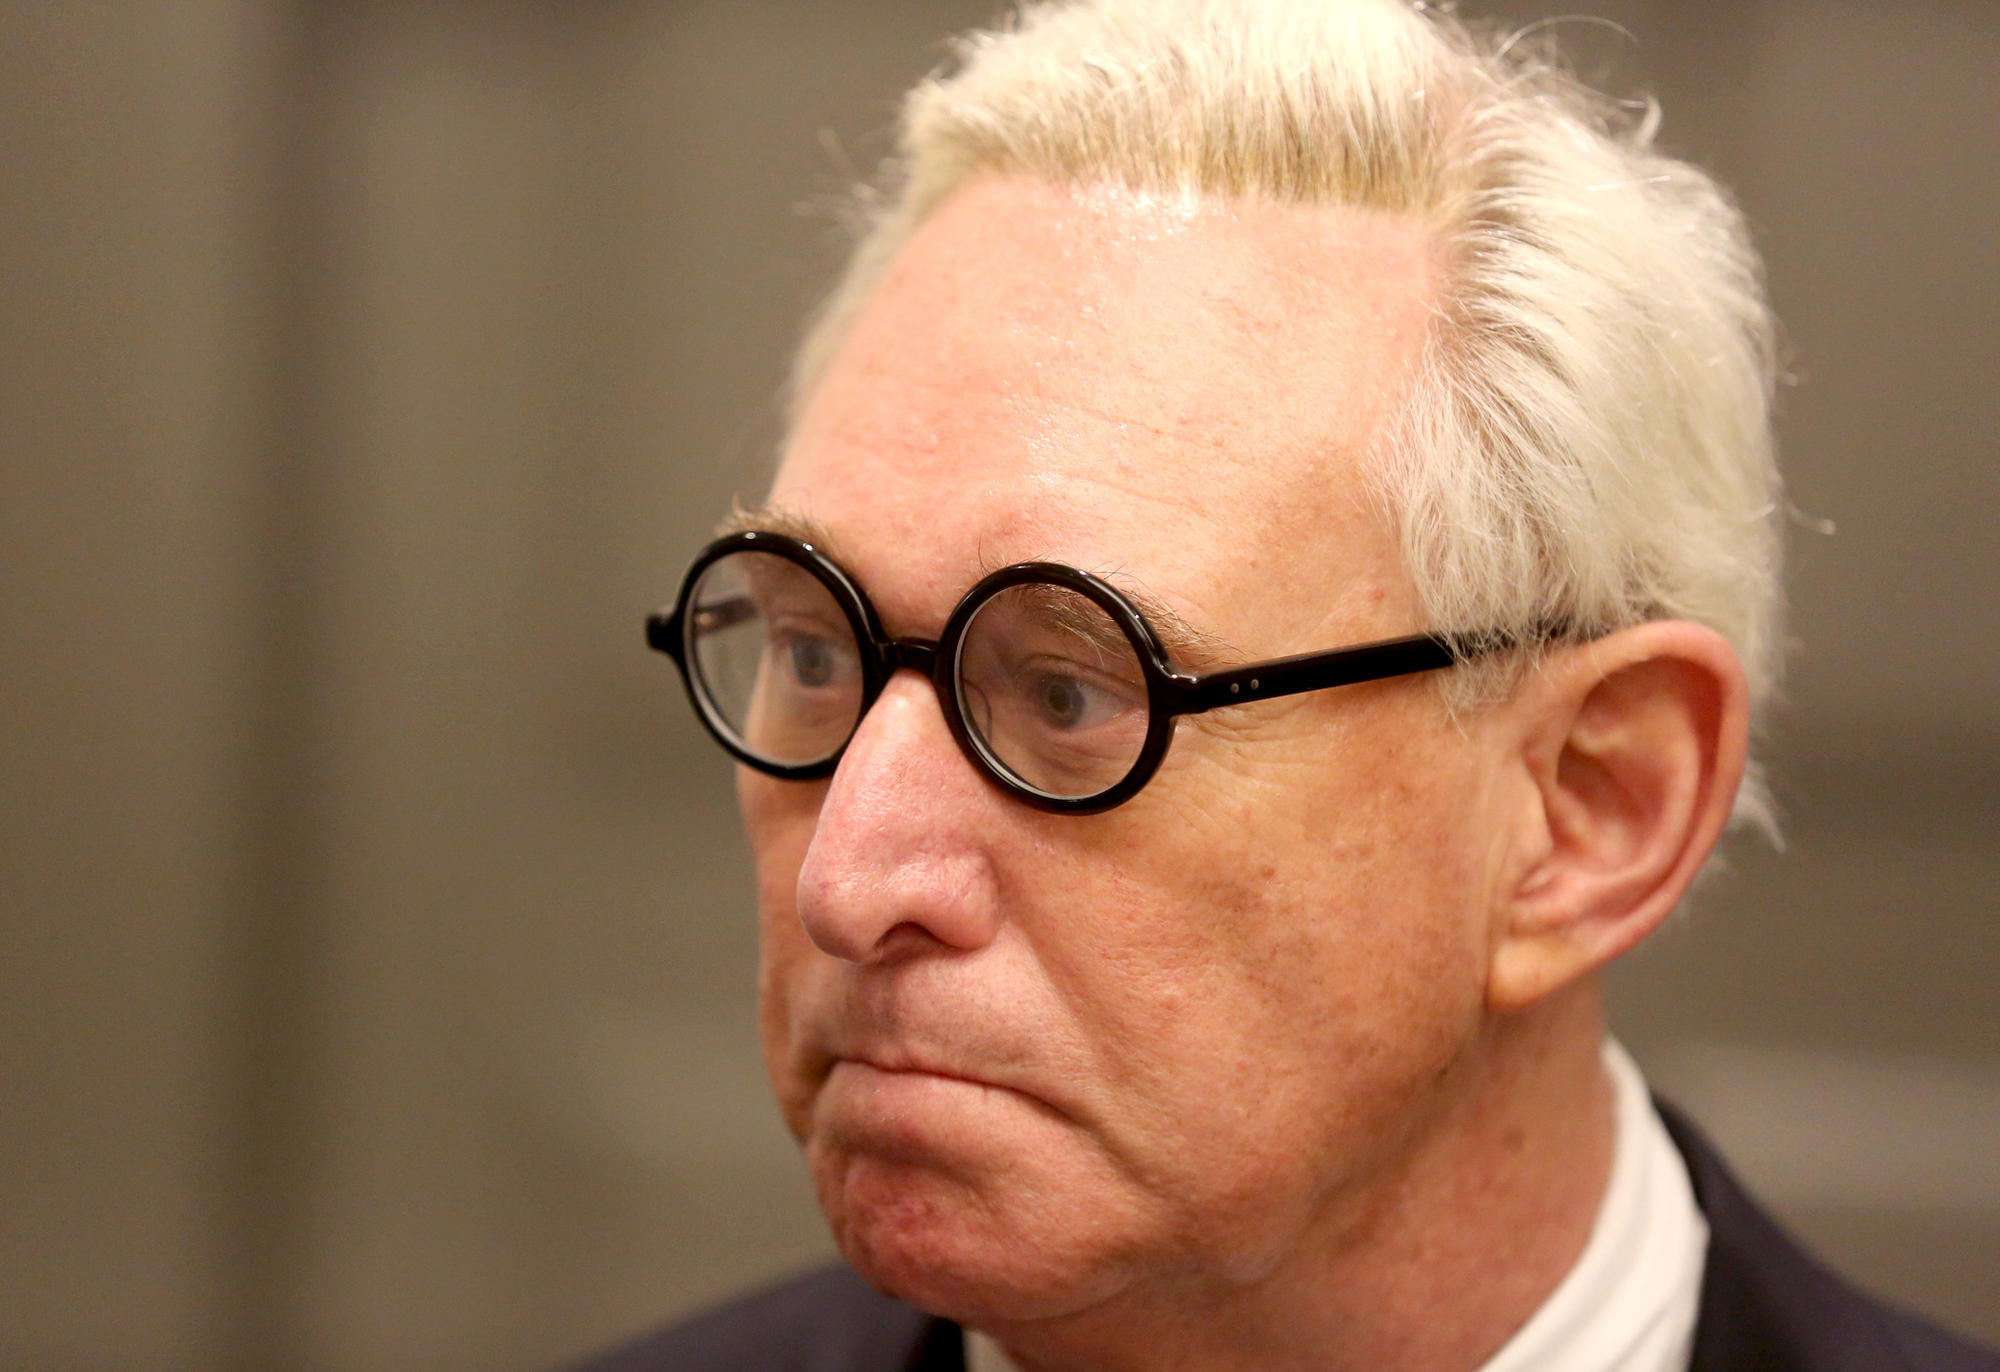 Trump ally Roger Stone kicked off Twitter after profanity-laced rant at CNN reporters ...